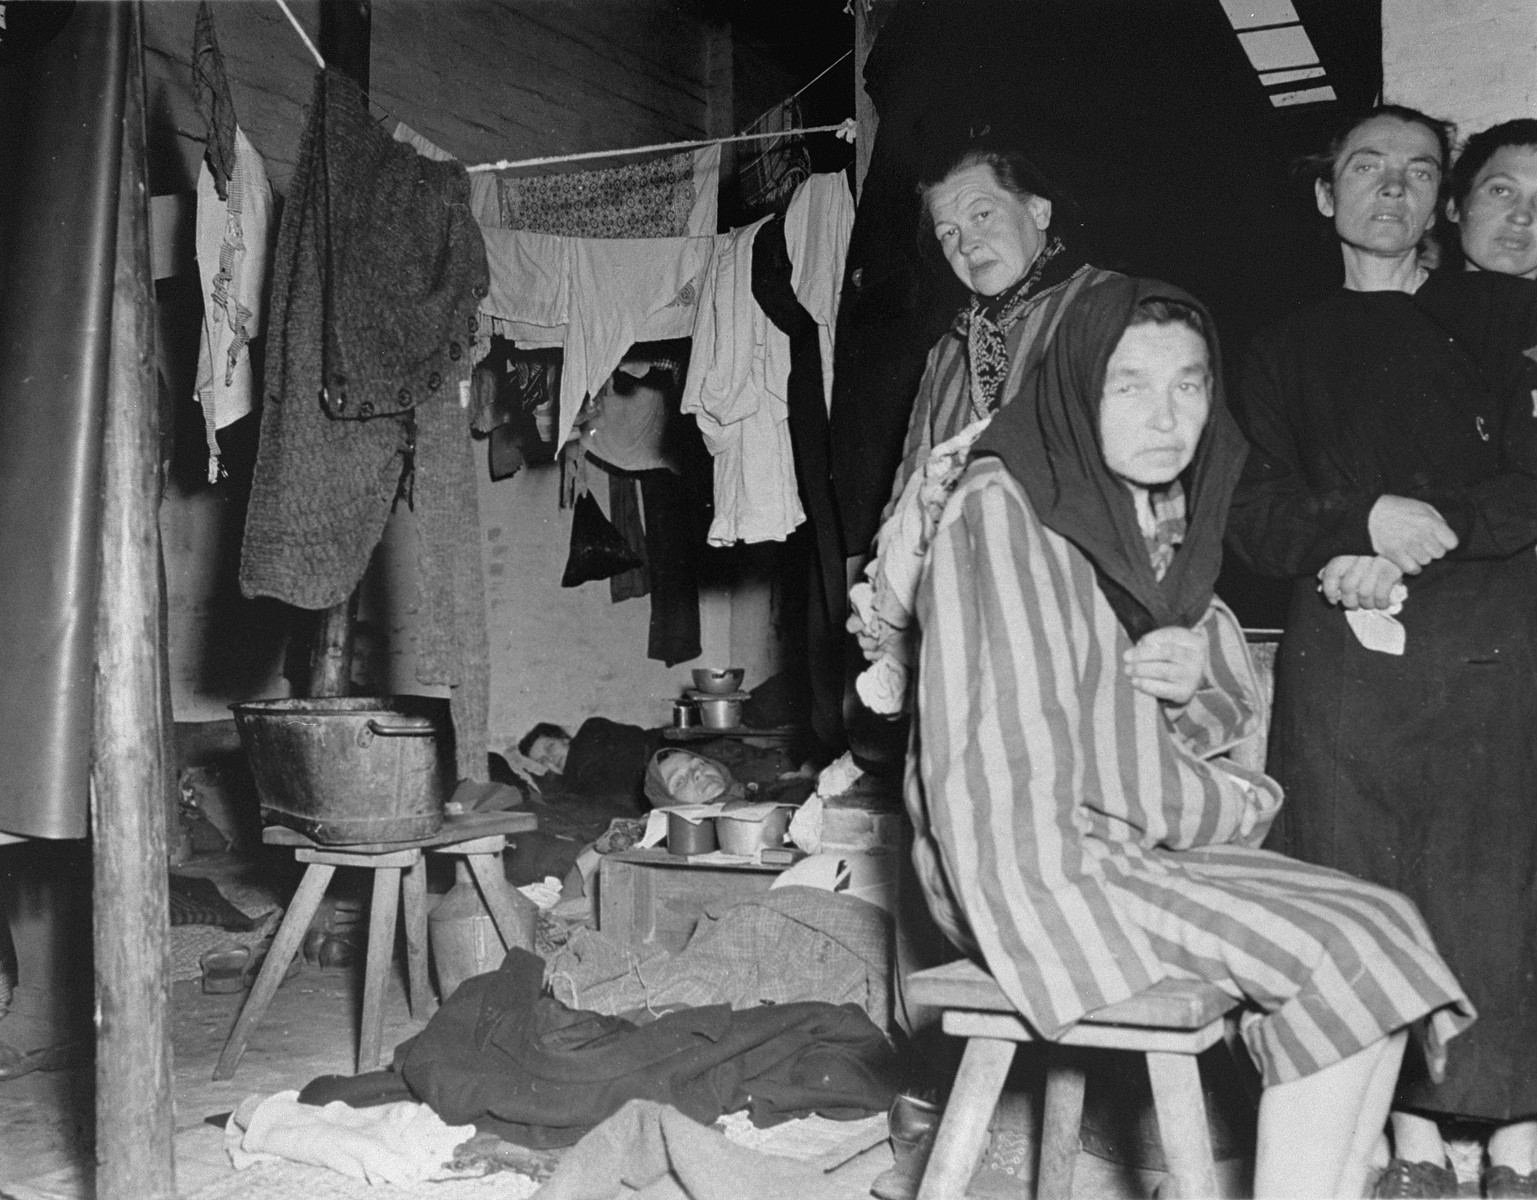 Female survivors inside a  barracks in Bergen-Belsen after liberation.

The original caption reads: "Interior of women's barracks in former Nazi prison camp at Belsen, Germany, showing pitiful conditions under which they were forced to live."